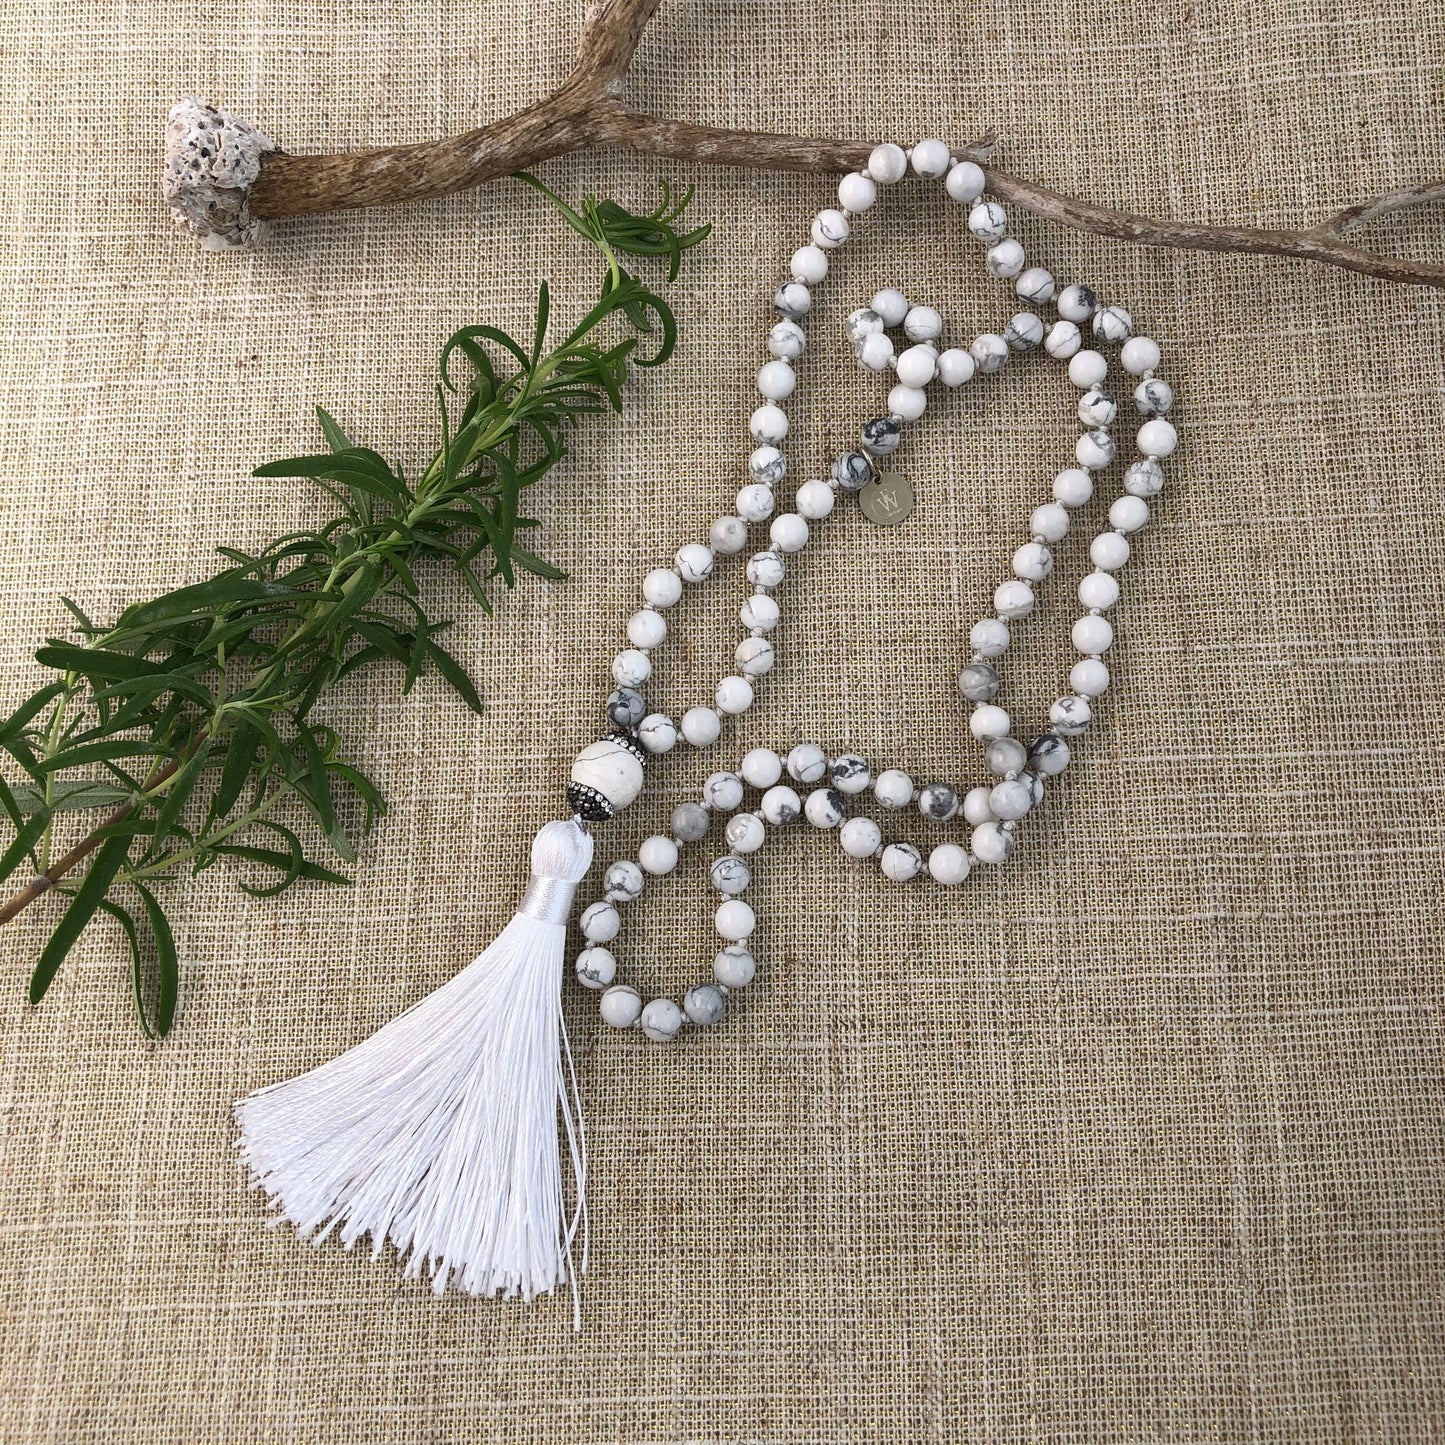 Hand Knotted White Magnesite Necklace it has an Embellished Beads and Silk Tassel